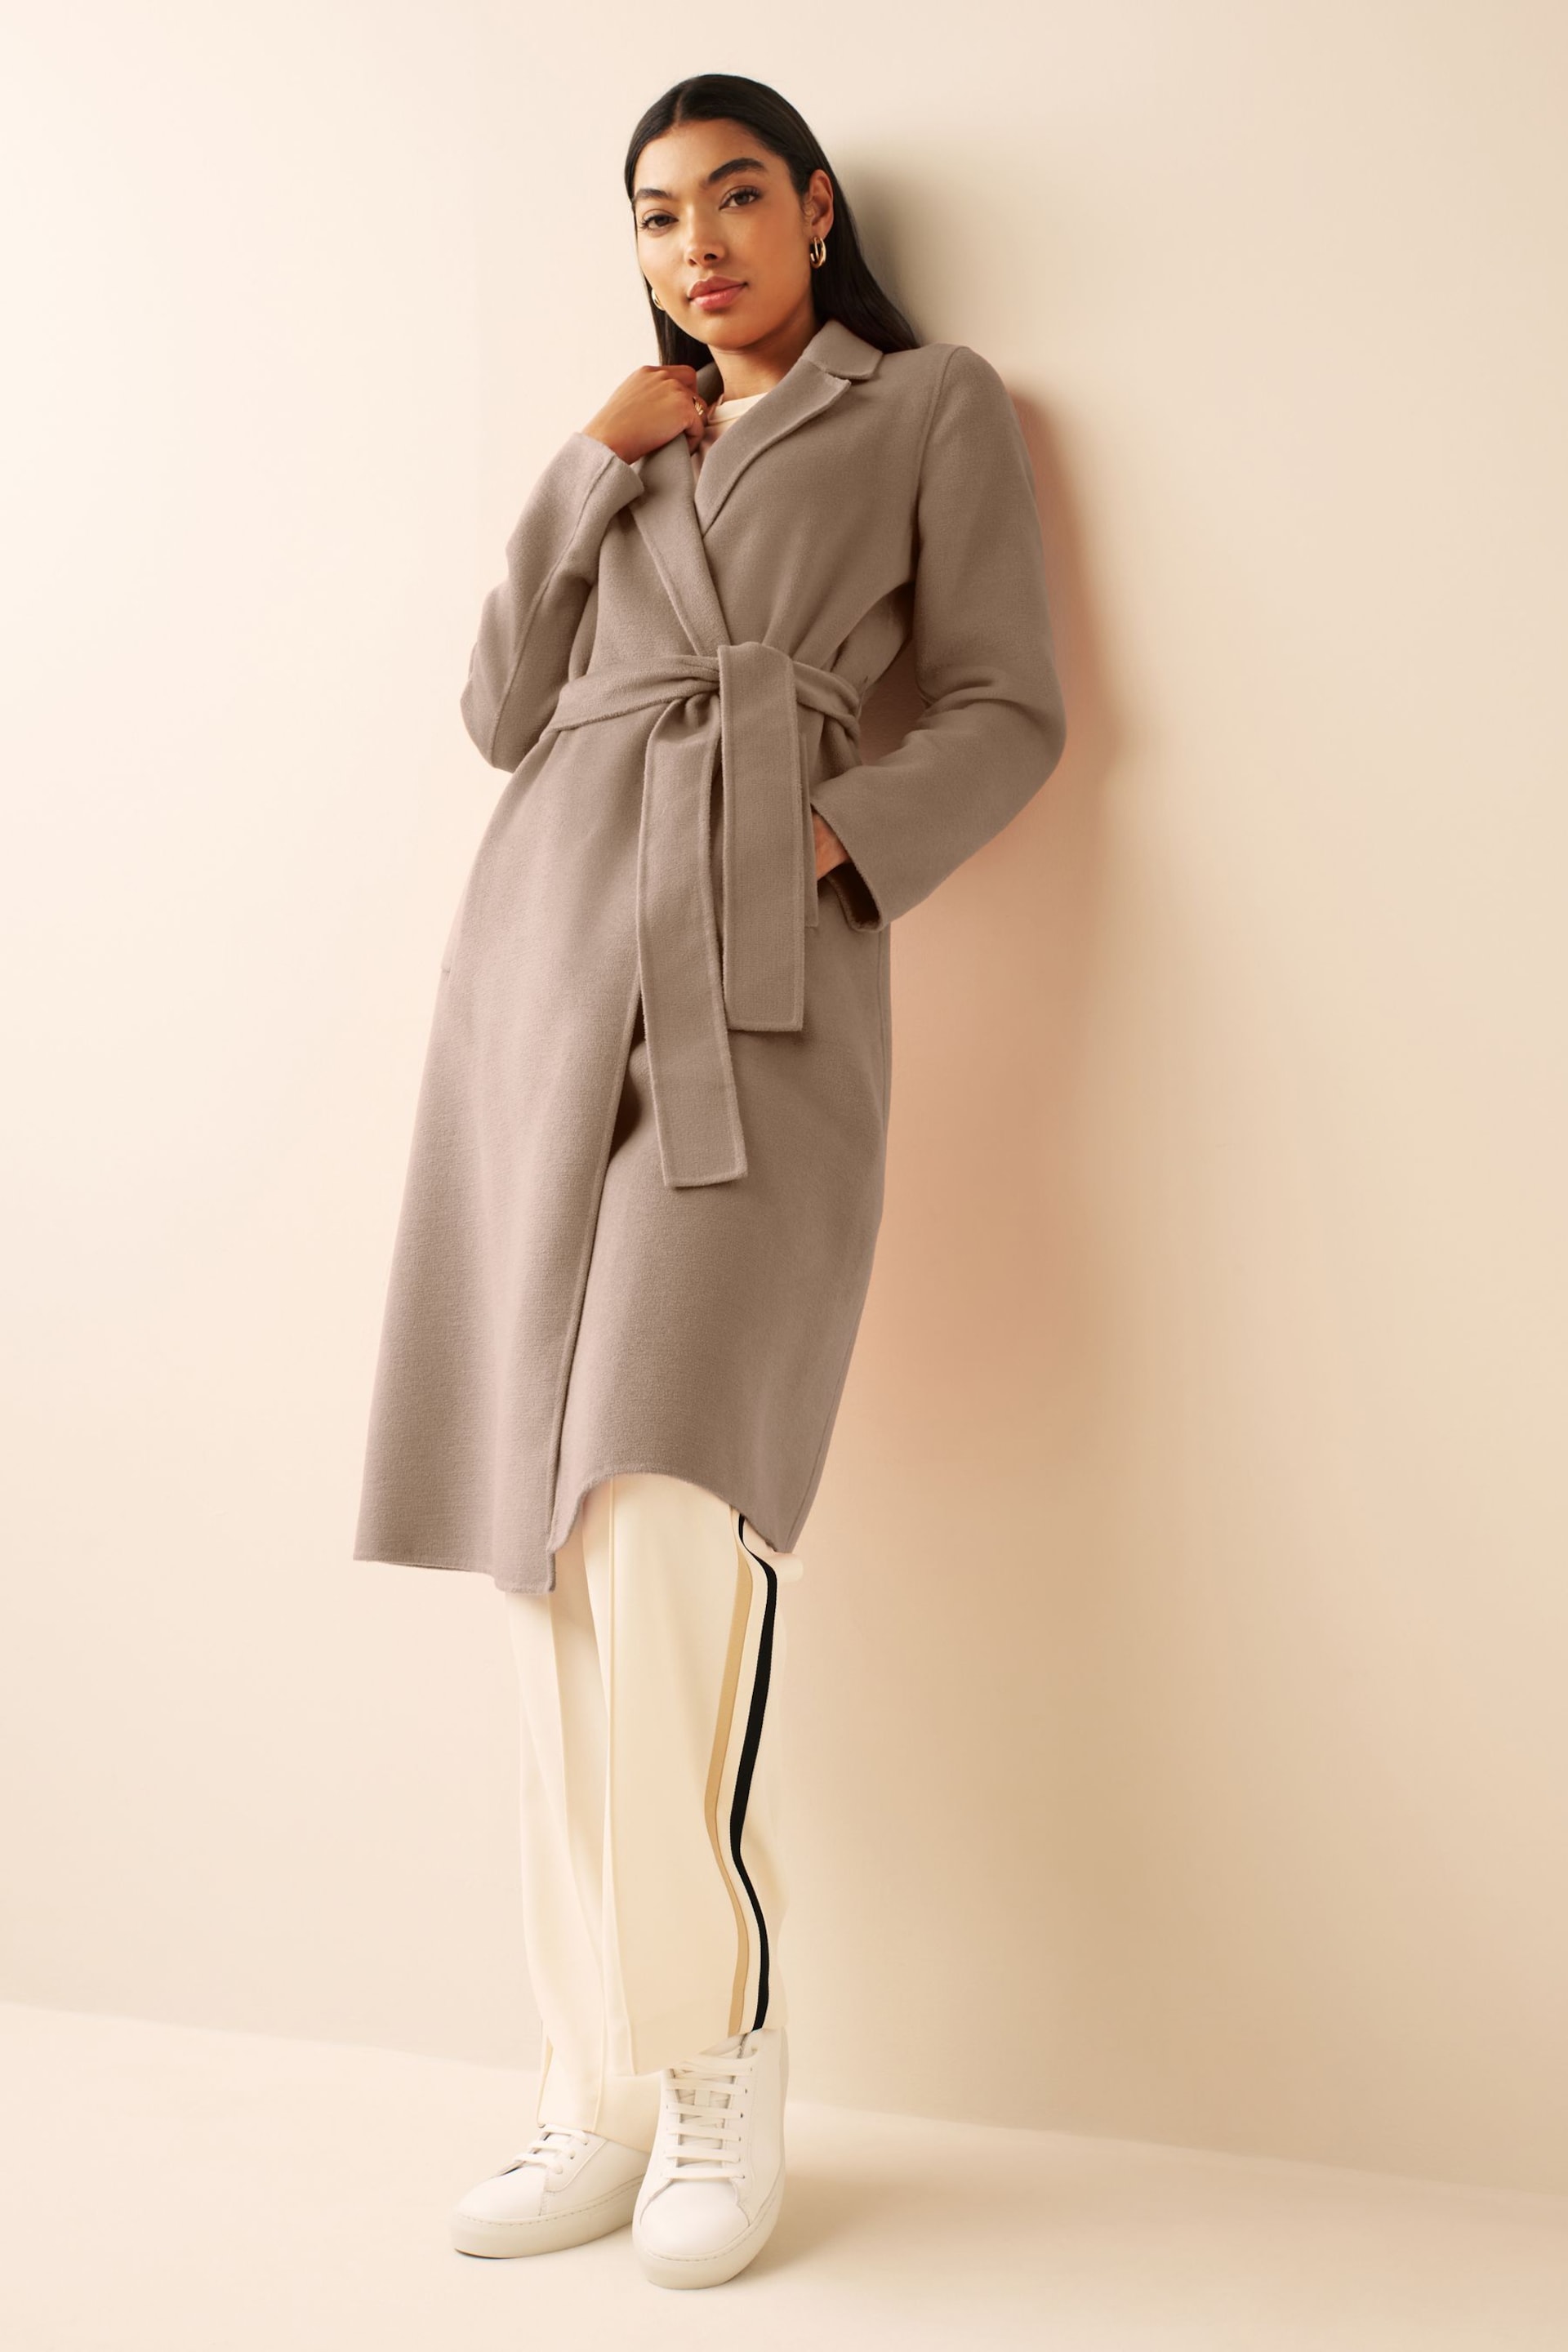 Emme by Marella Neutral Antonia Jersey Trench Coat - Image 4 of 6